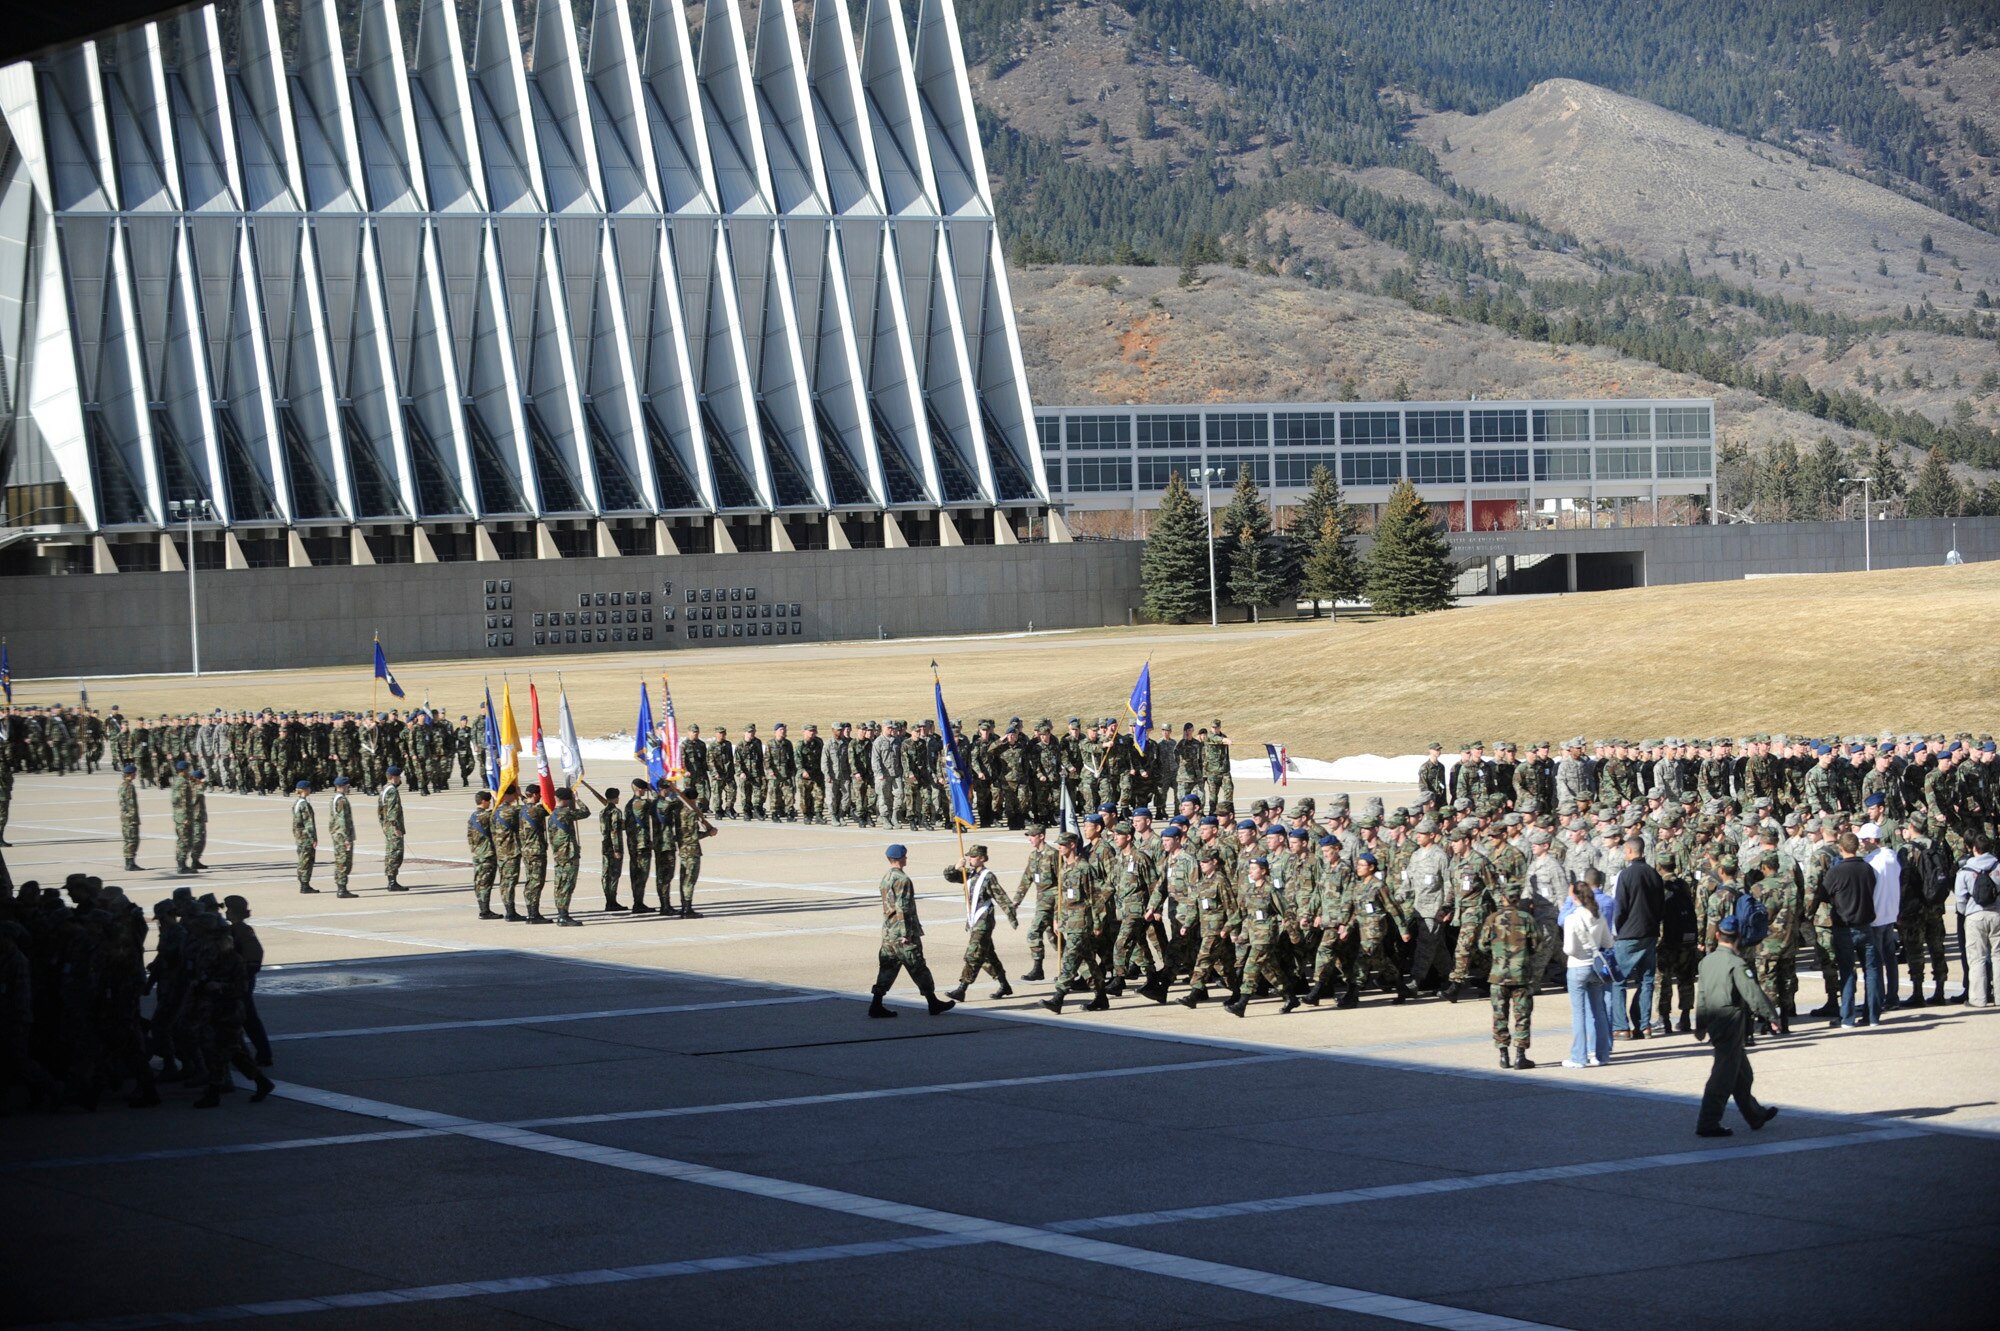 Cadets march past the chapel at the U.S. Air Force Academy in Colorado Springs, Colo., Jan. 23 on their way to Mitchell Hall Cadet Dining Facility. The dining facility feeds approximately 4450 cadets and sits on 1.75 acres. (U.S Air Force photo/Staff Sgt. Desiree N. Palacios)